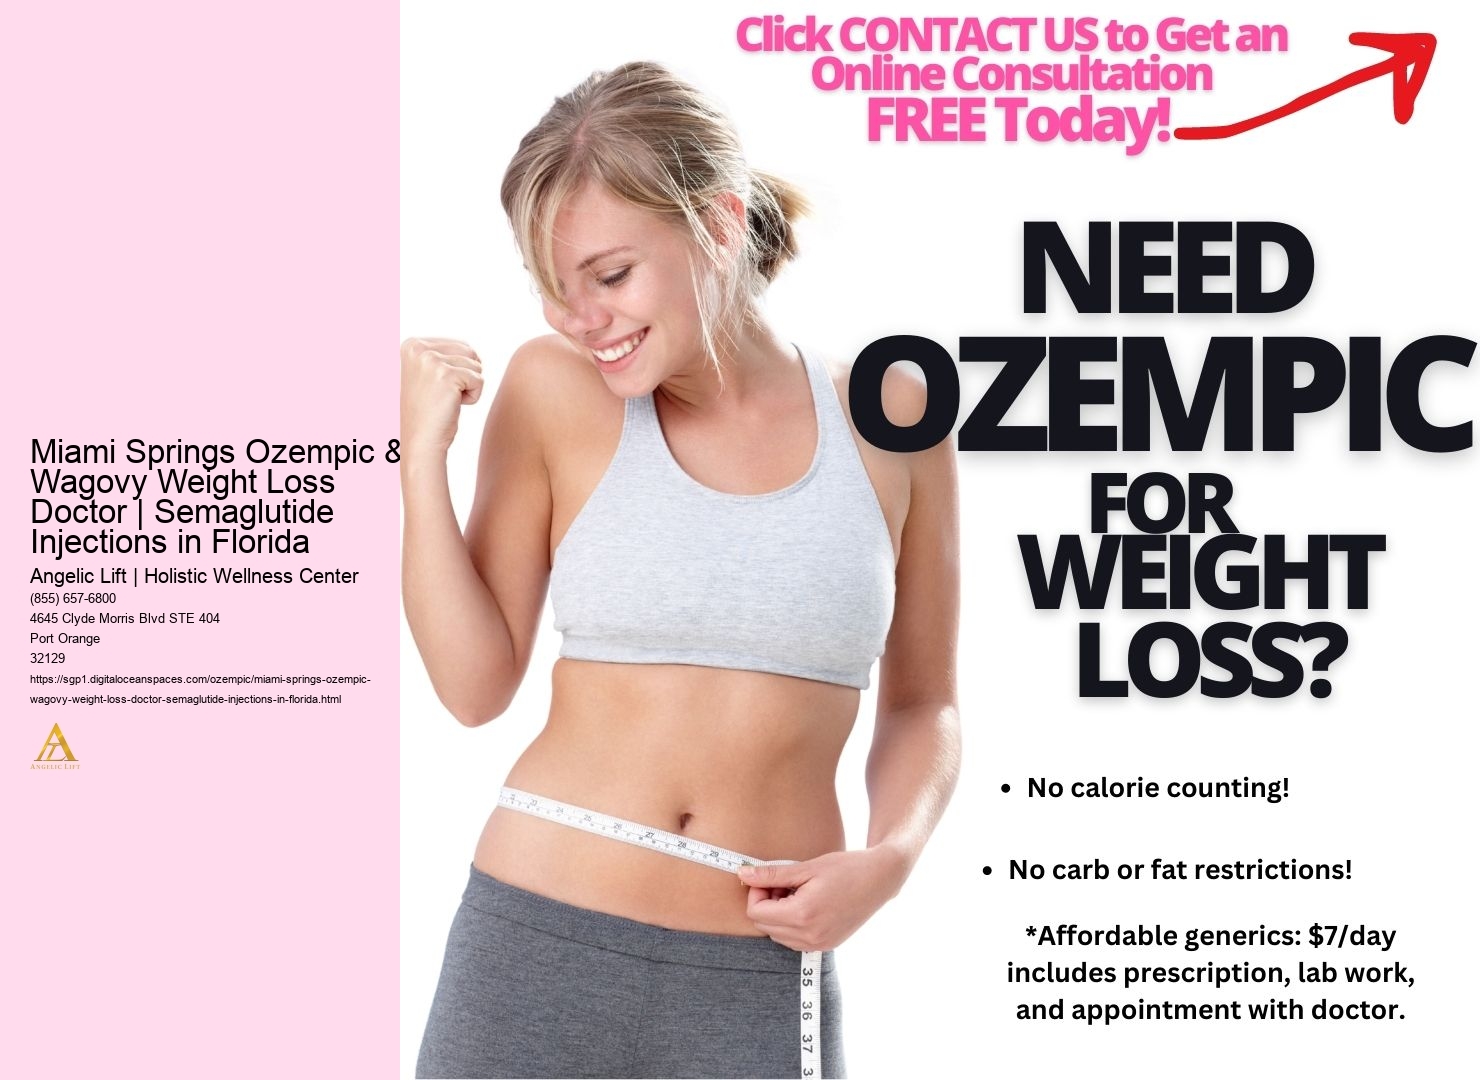 Miami Springs Ozempic & Wagovy Weight Loss Doctor | Semaglutide Injections in Florida